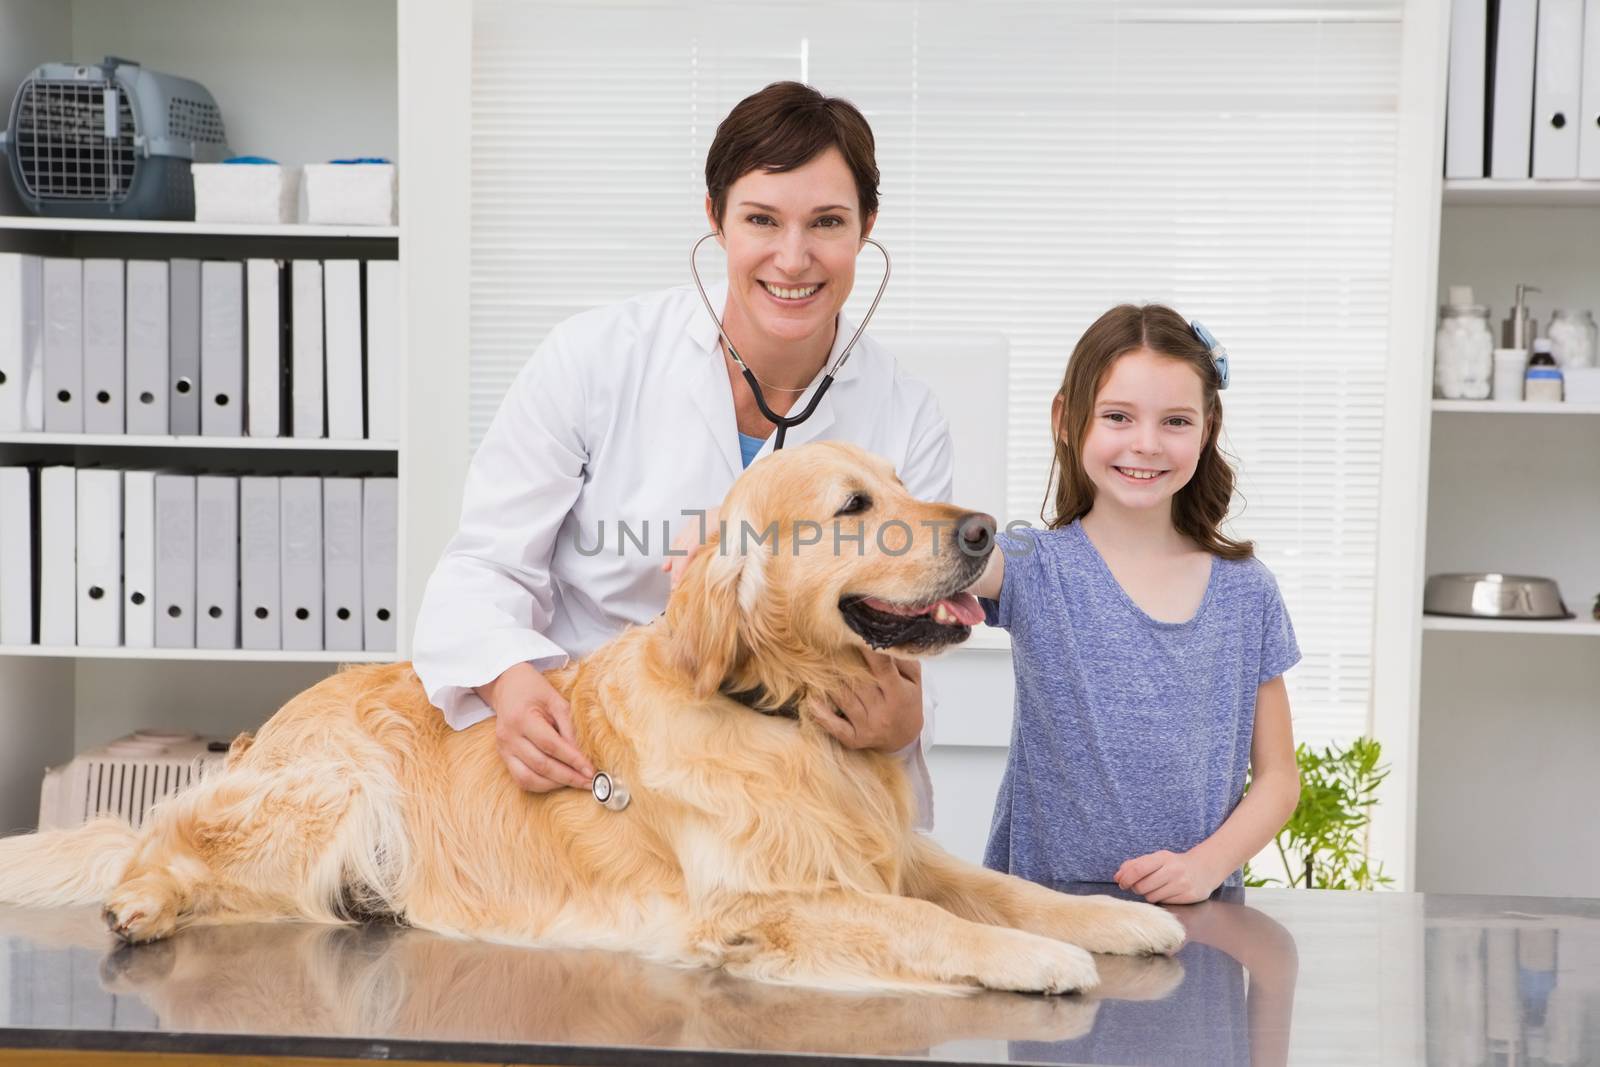 Smiling vet examining a dog with its owner in medical office